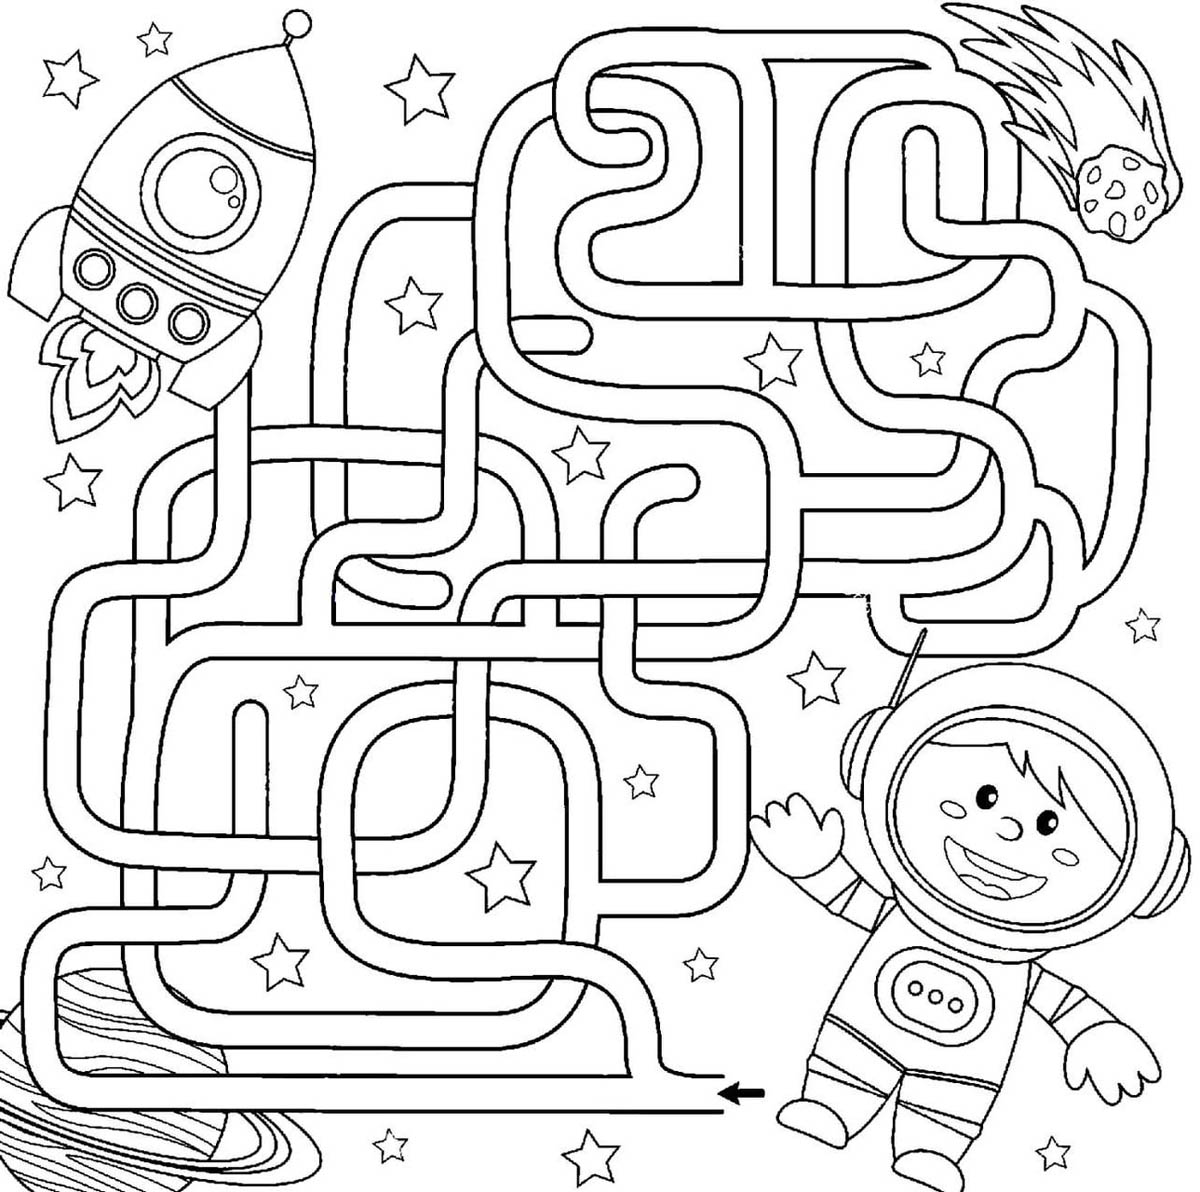 Free Astronaut Maze Coloring Pages printable